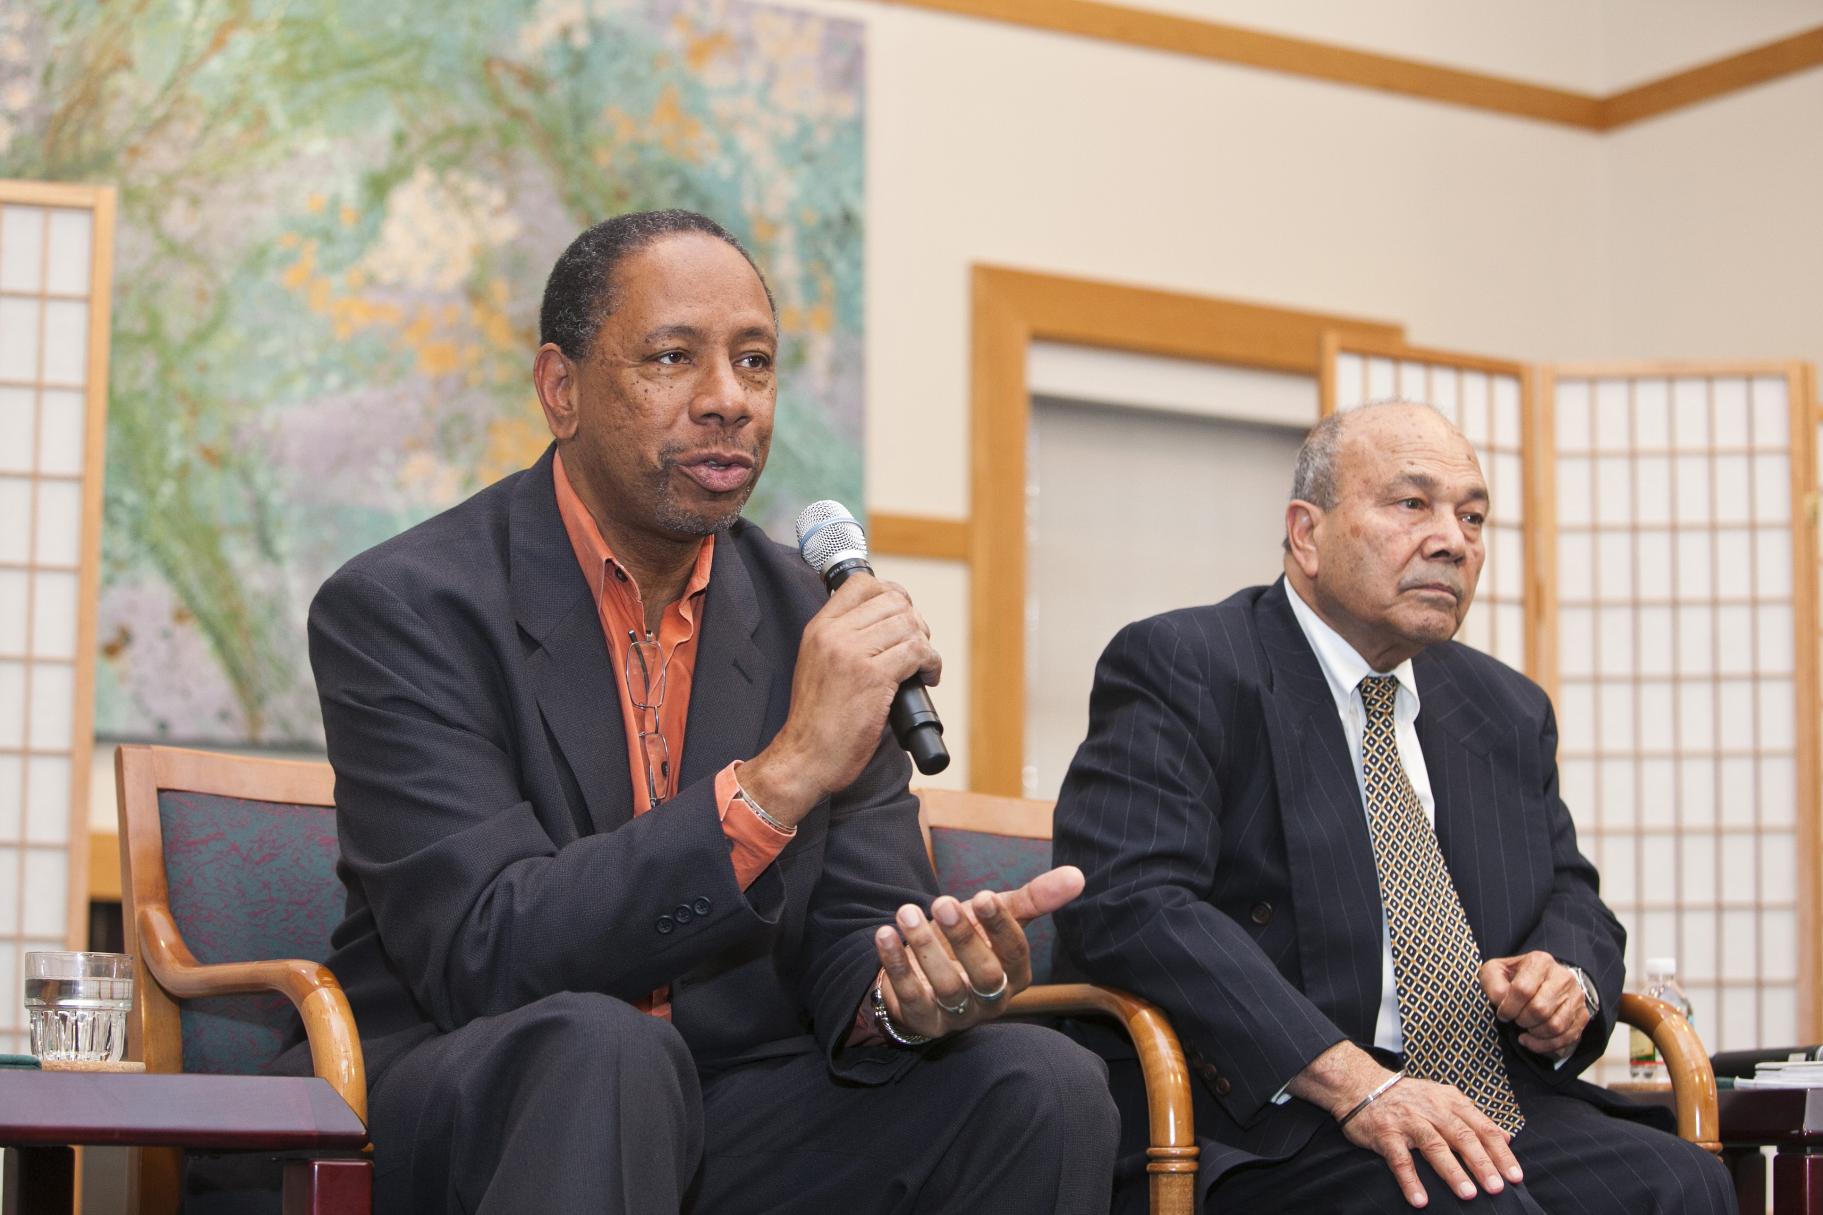 2012 Ikeda Forum panelists respond to questions from the audience